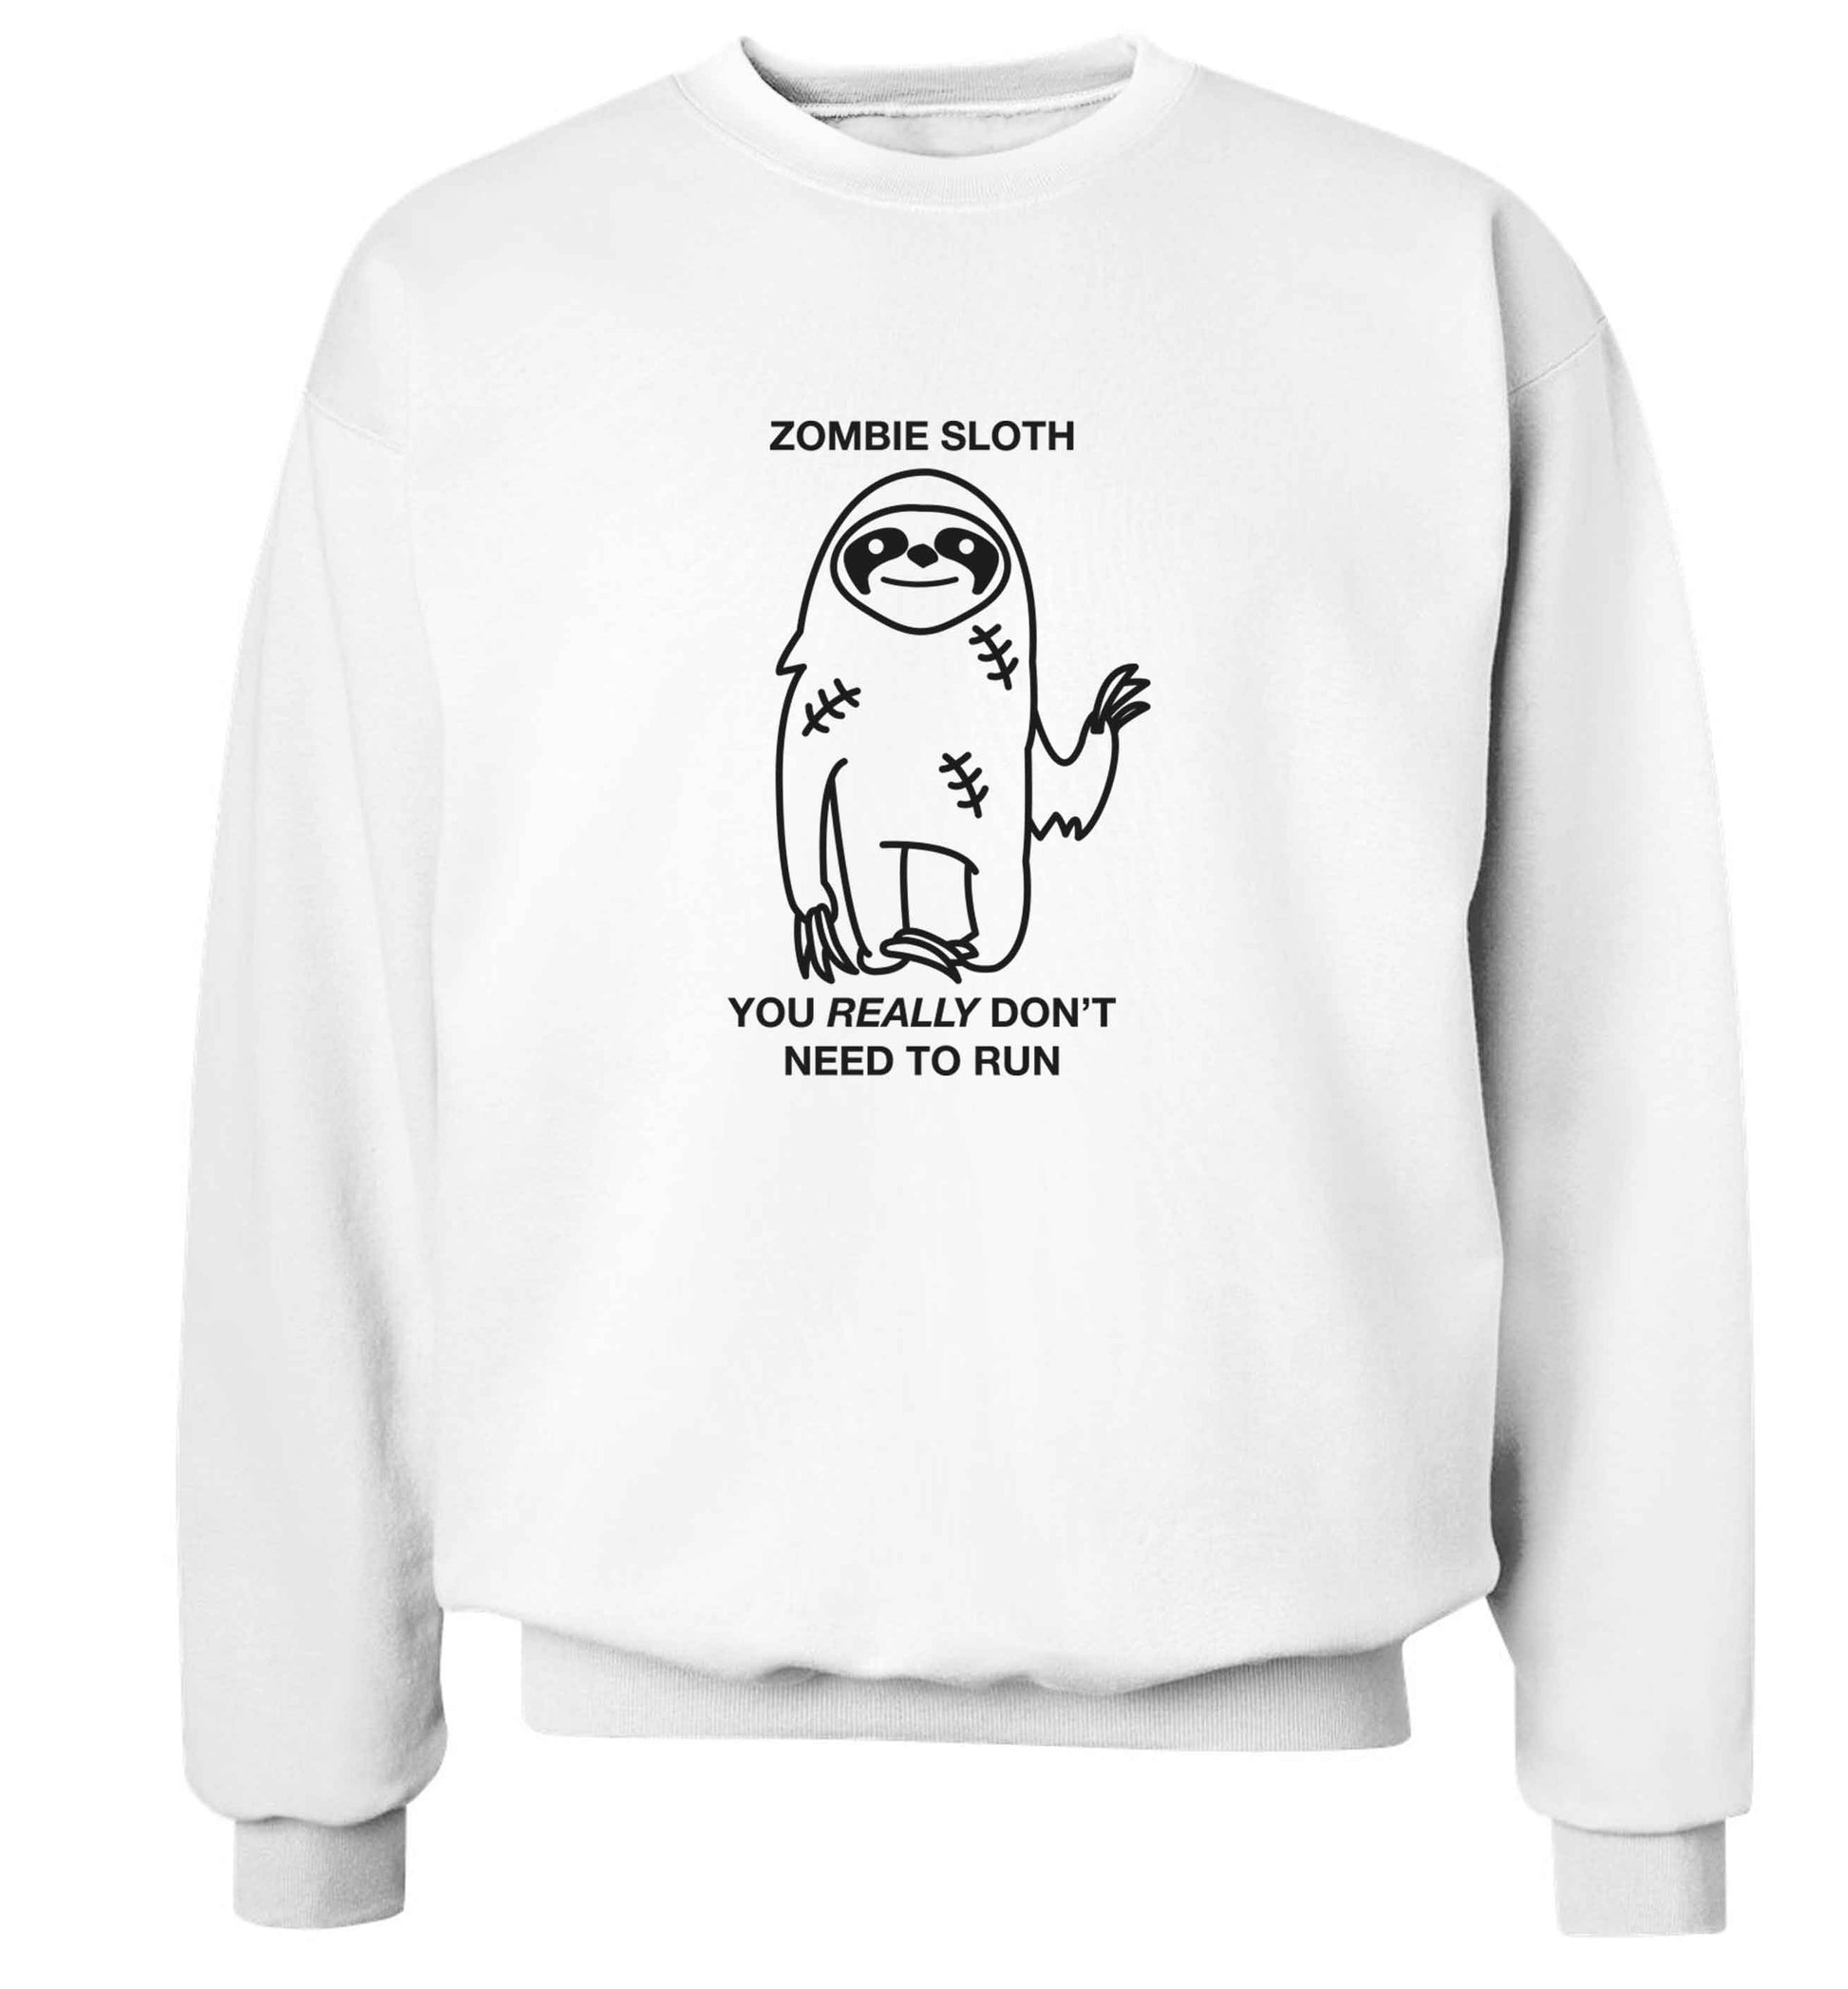 Zombie sloth you really don't need to run adult's unisex white sweater 2XL